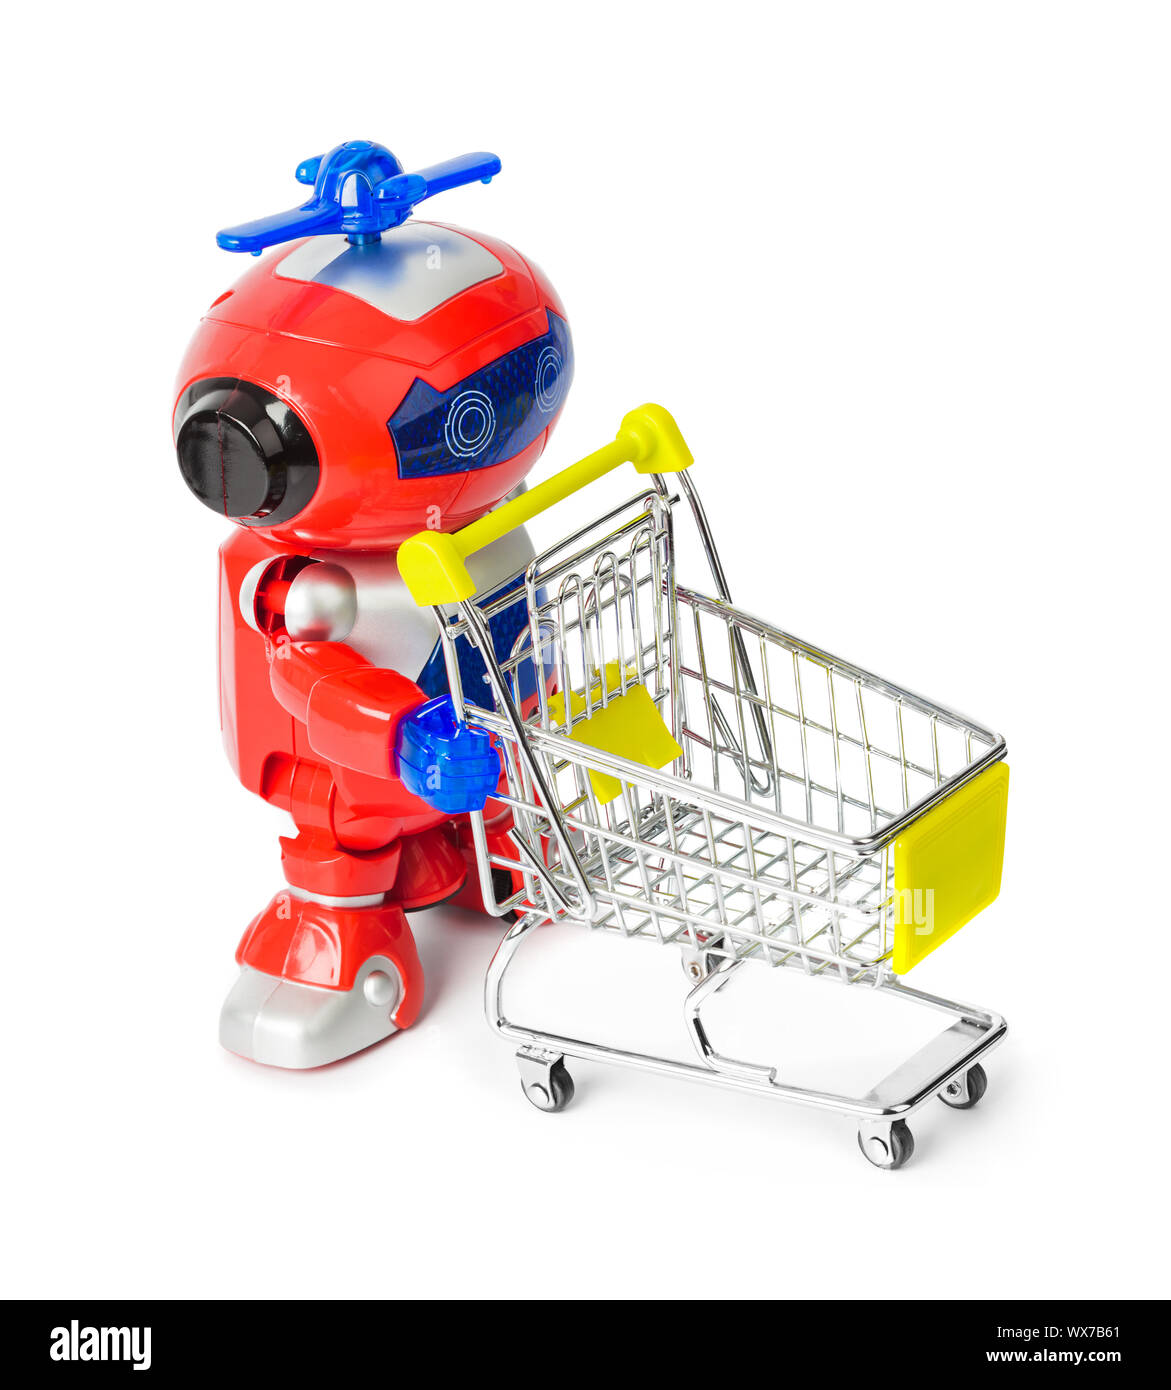 Toy robot and shopping cart Stock Photo